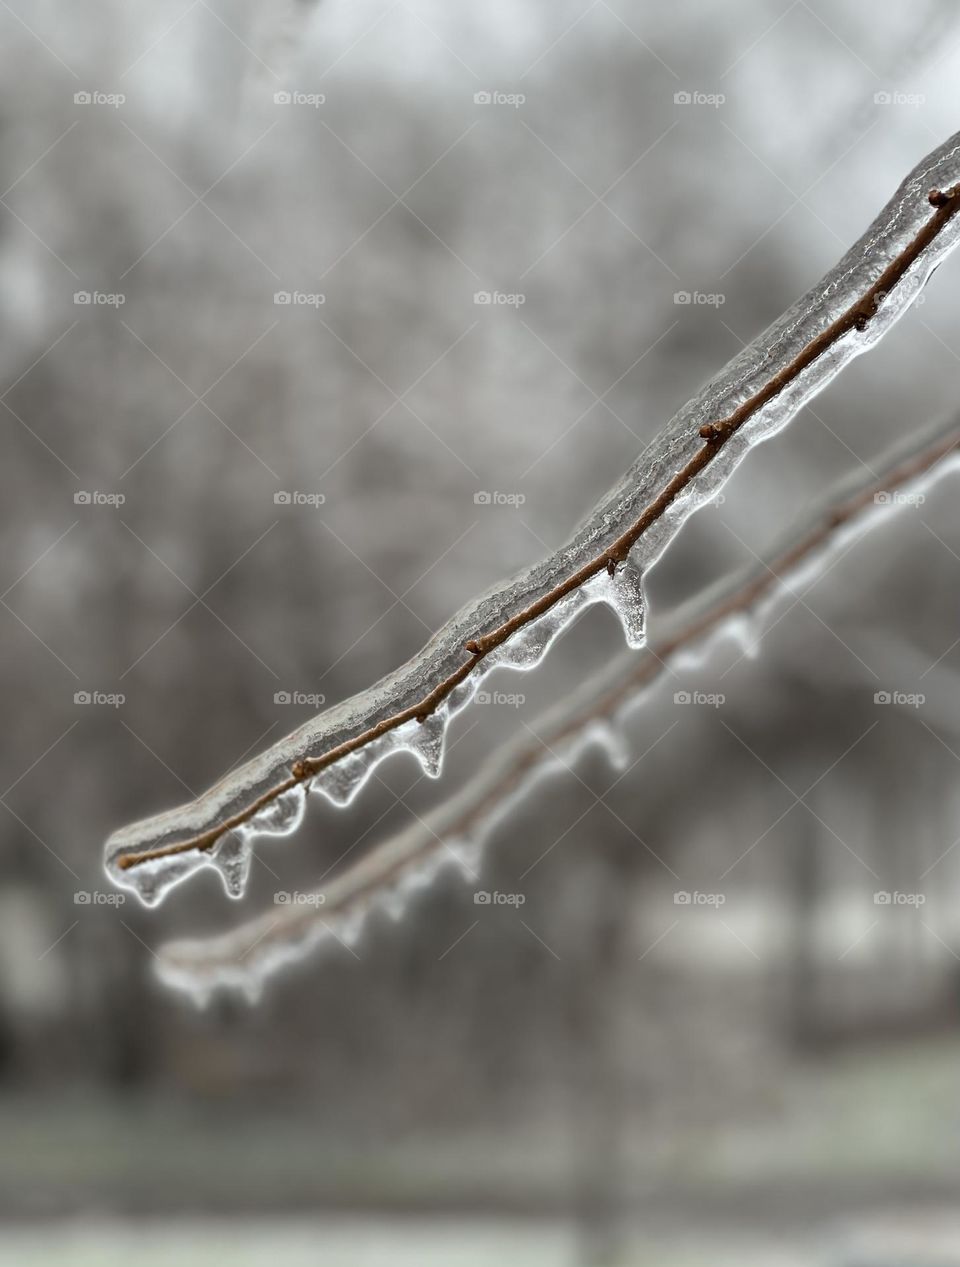 Branch of the tree glazed with ice